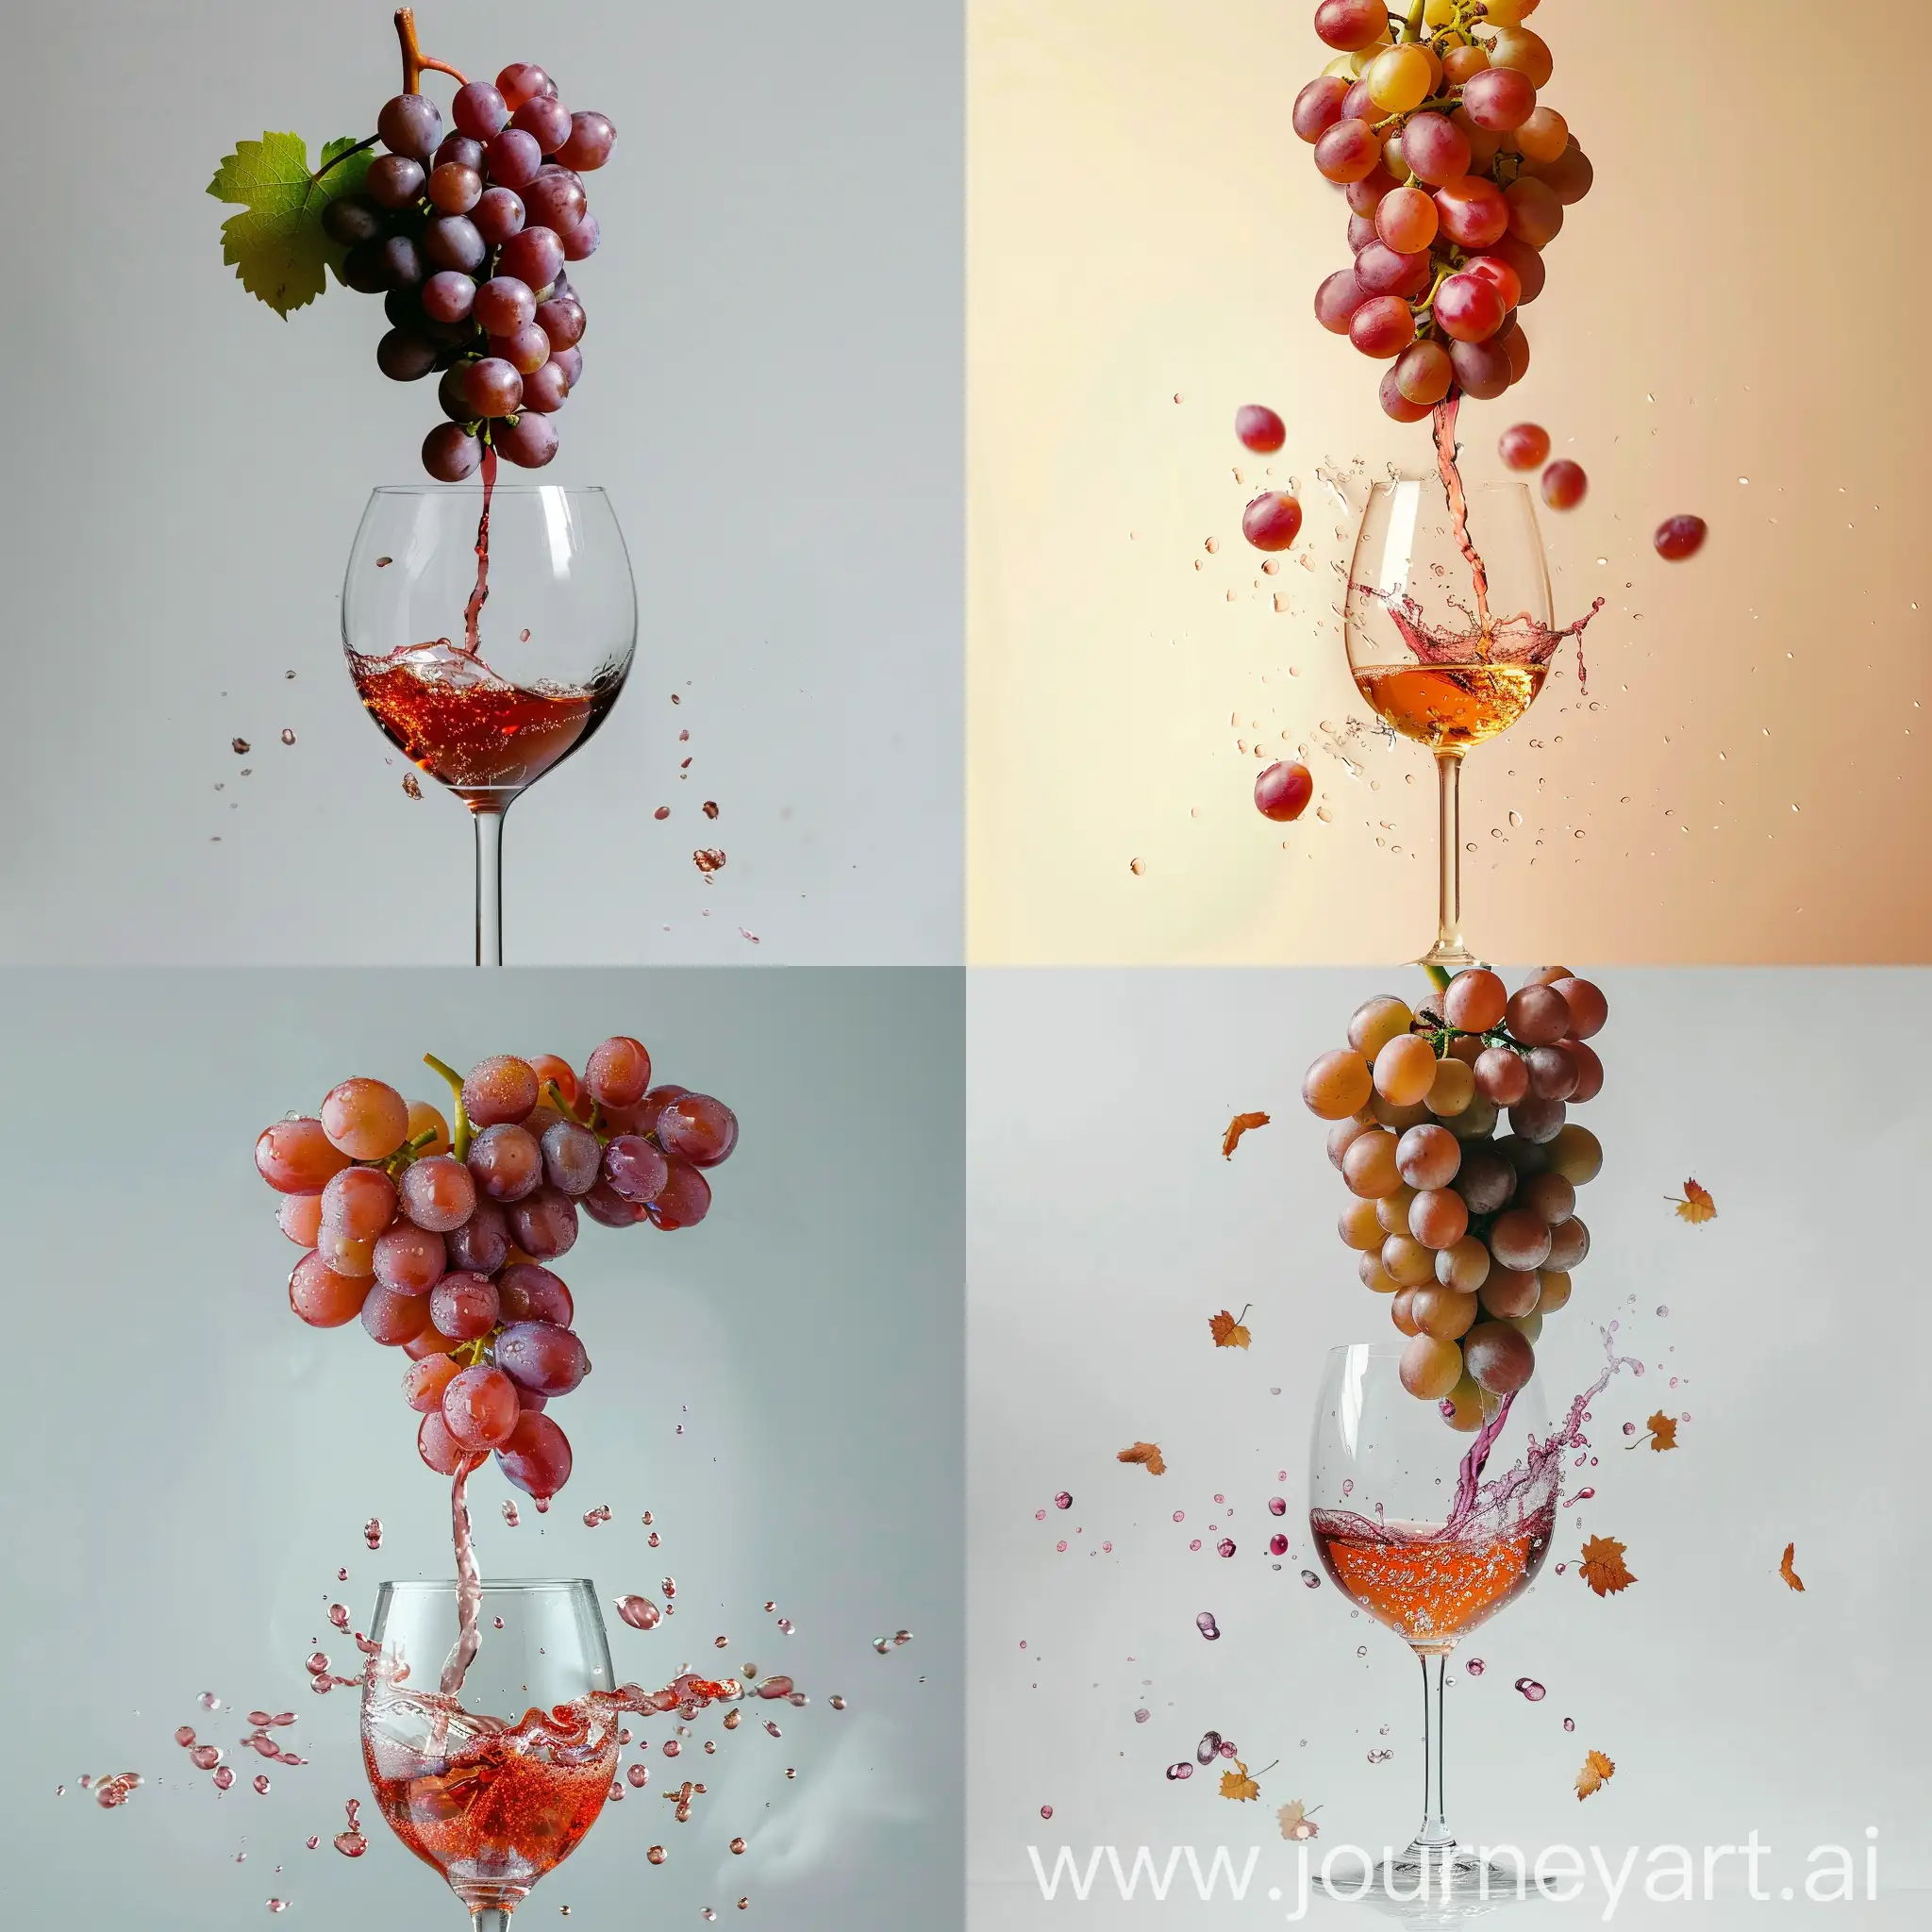 a bunch of grapes just above a wine glass, the wine is flowing between the grapes and falling into the glass, minimalist photo